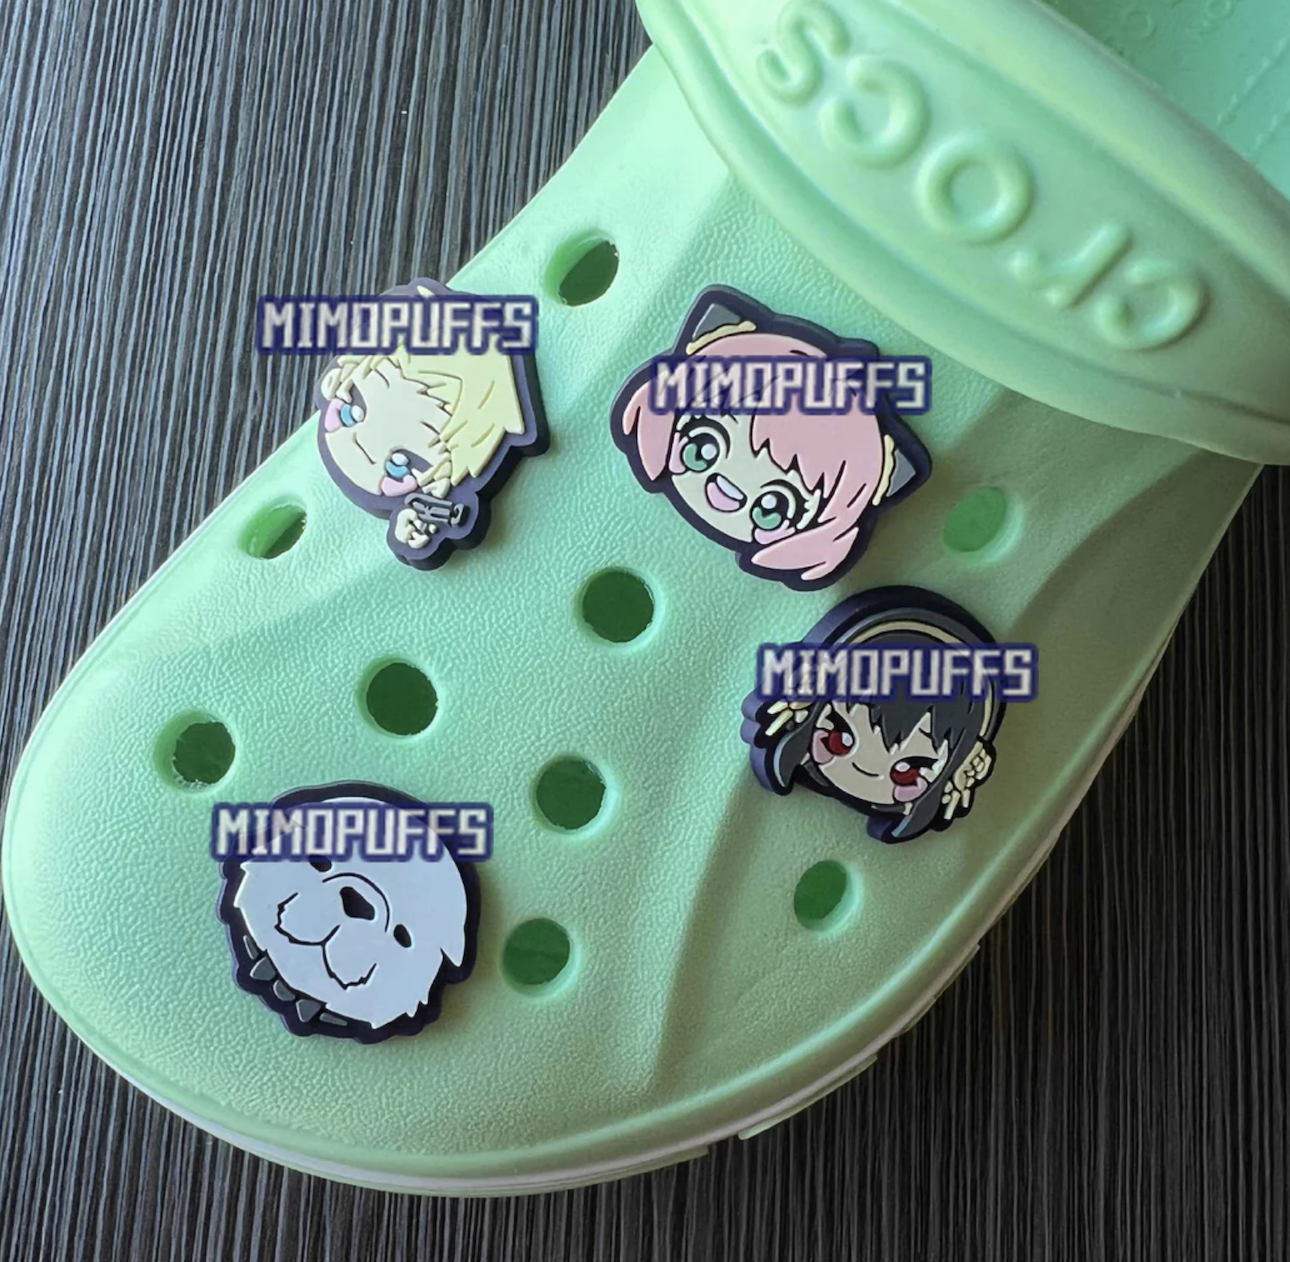 Four animated character shoe charms attached to a single pastel green Croc.